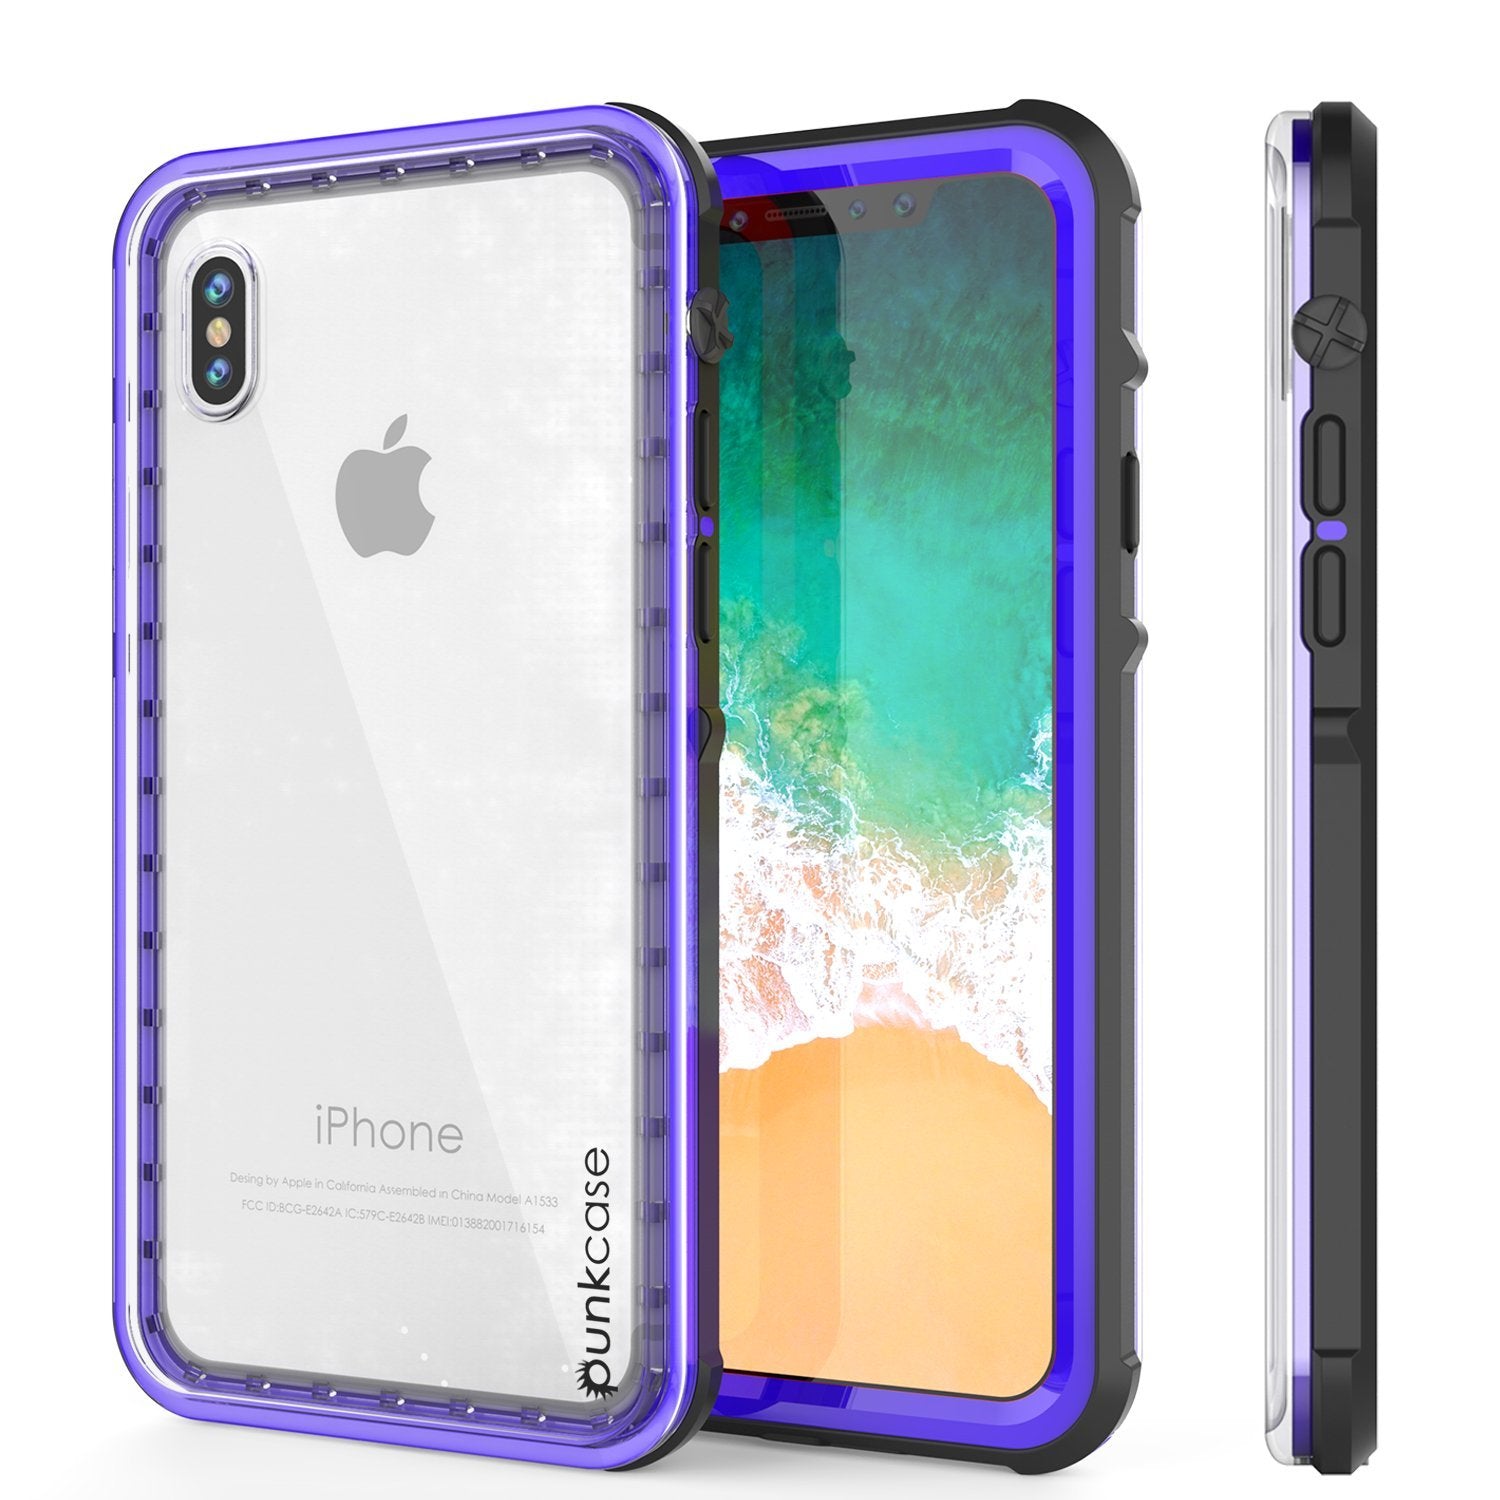 iPhone XS Max Case, PUNKCase [CRYSTAL SERIES] Protective IP68 Certified Cover [Purple]